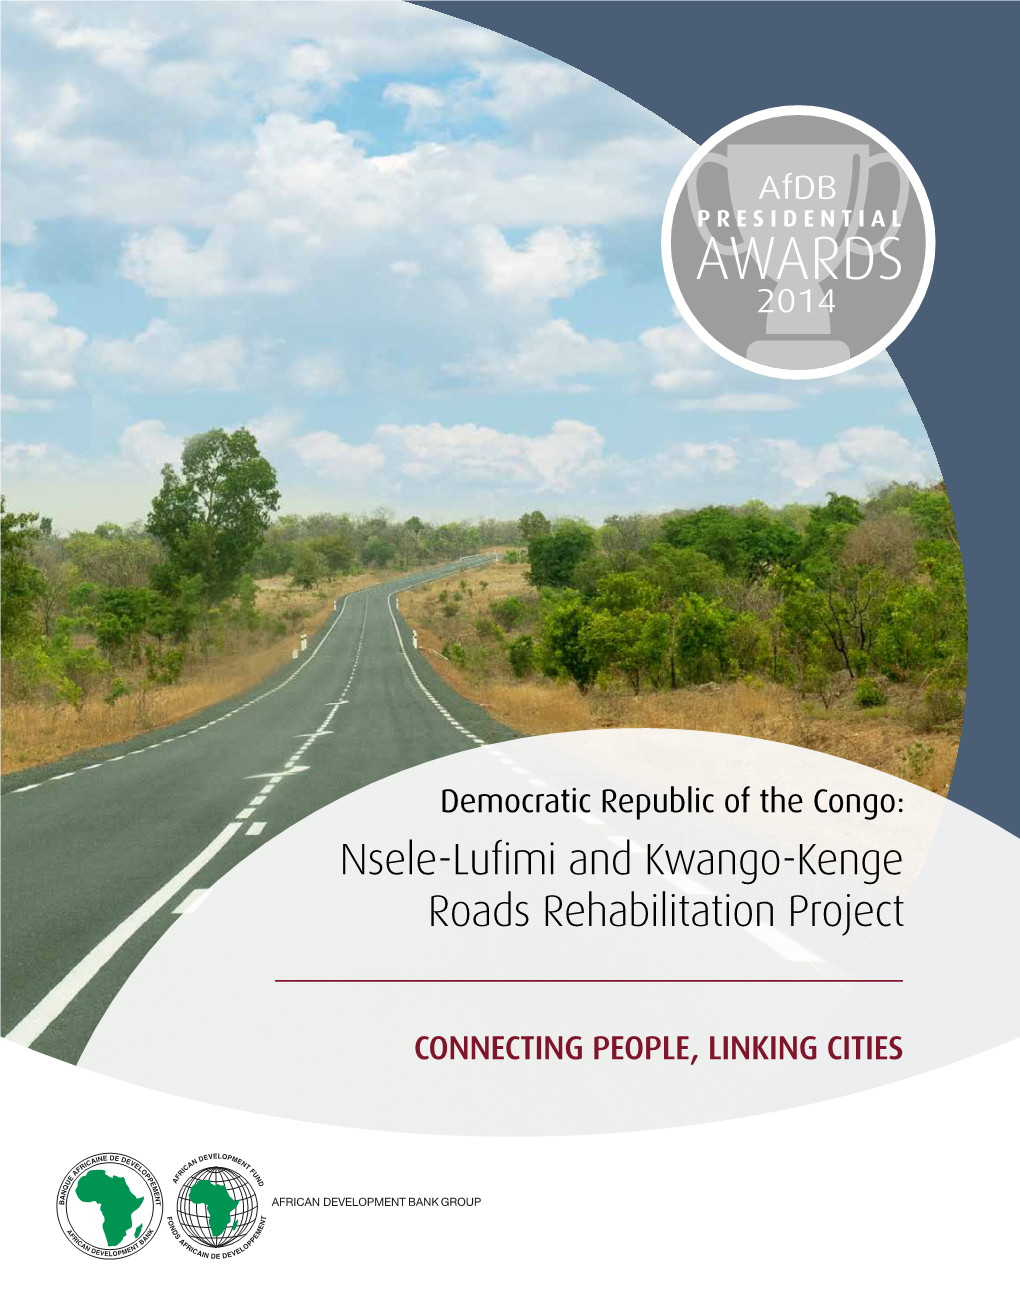 Second Prize for Nsele-Lufimi and Kwango-Kenge Road